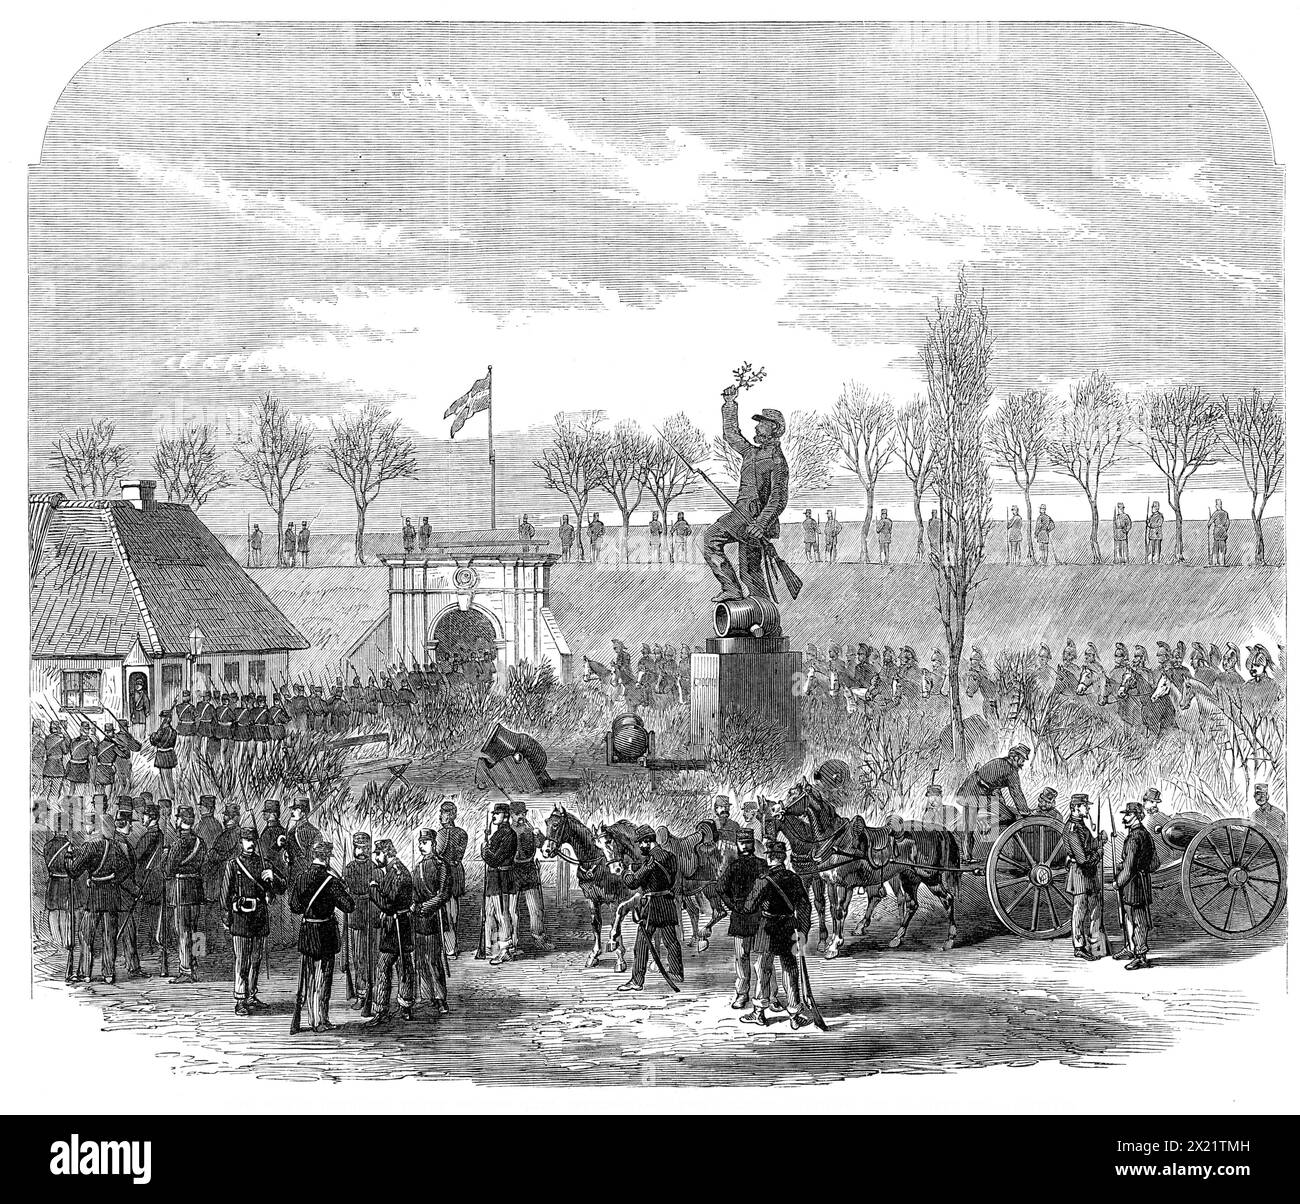 The War in Denmark: inside Kolding Gate, Fredericia - Danish soldiers marching out to meet the Austrians, 1864. 'The monument inside the Kolding Gate, which is seen in our Engraving, is an interesting record of the Schleswig-Holstein war of fifteen years ago. It is a fine bronze statue of the representative Danish infantry soldier, &quot;Den Tappre Land-Soldat,&quot; whose valour is justly extolled in the well-known National Song of Denmark. On the pedestal of this statue is inscribed the date &quot;July 6, 1849.&quot; On that occasion the Germans, being allowed to take up the ground west, nor Stock Photo